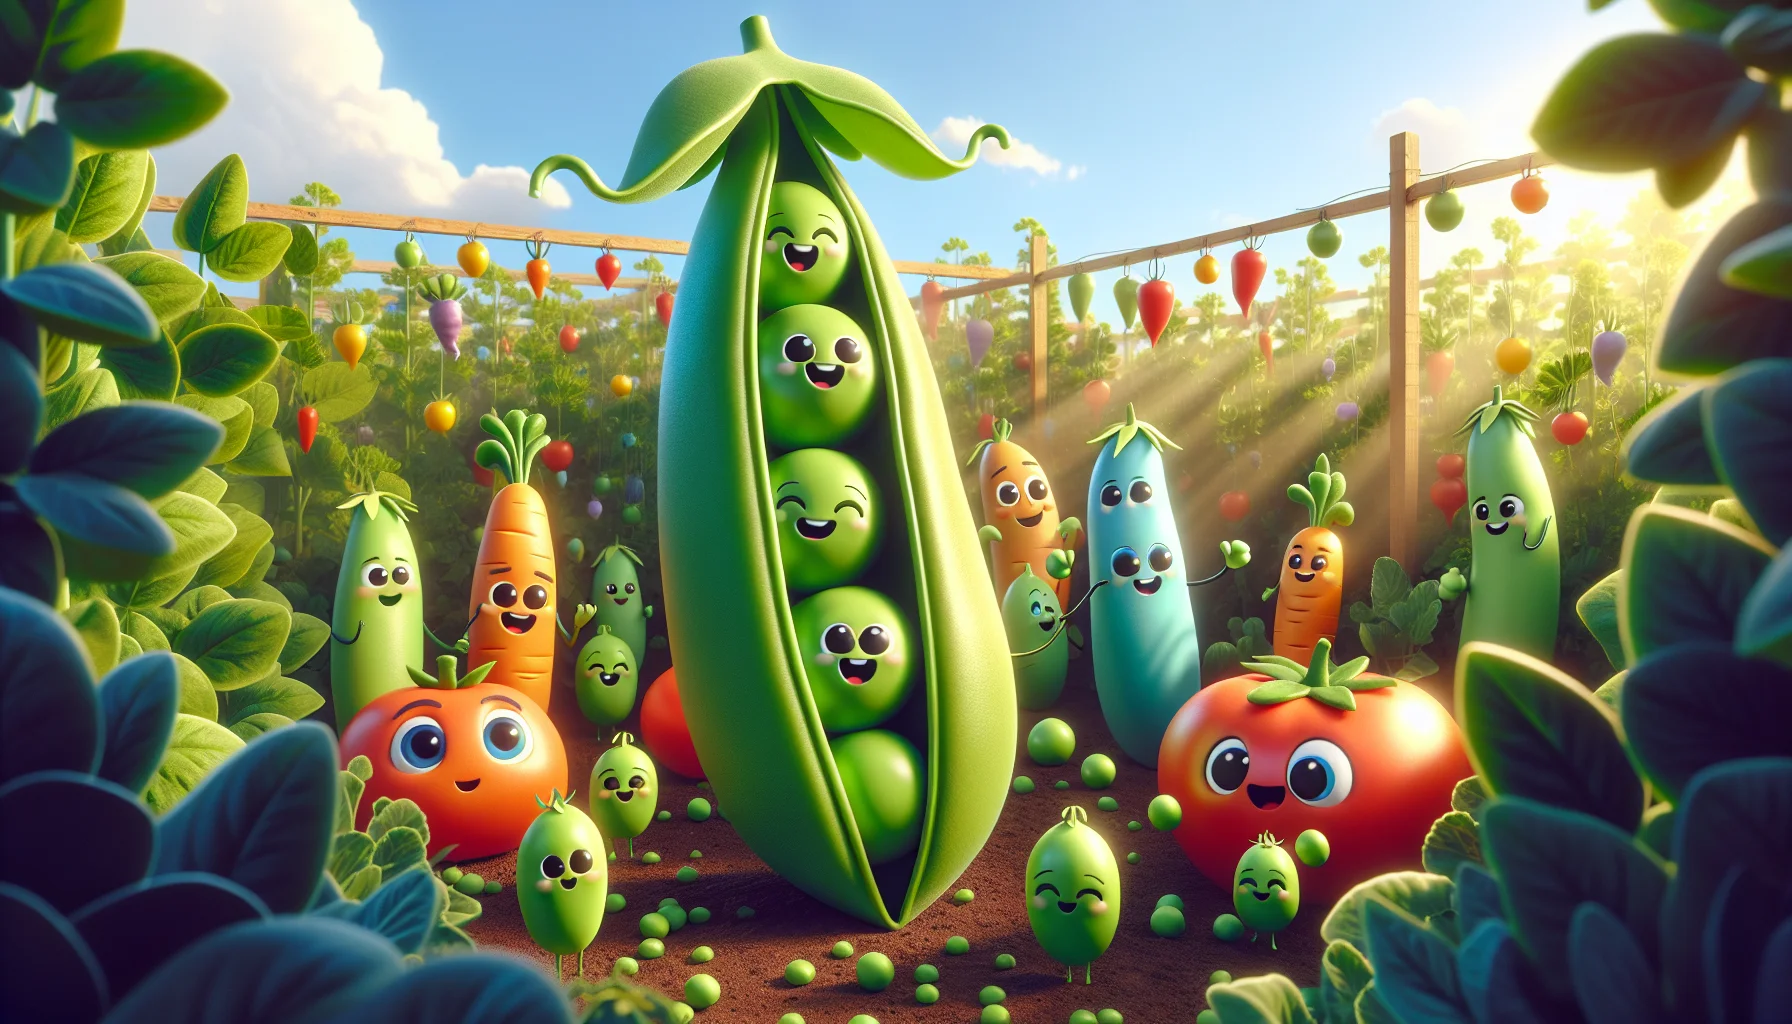 Imagine a brightly colored garden scene under the midday sun with soft shadows and vibrant green plants. There's a pea pod at the center of the scene, unusually large, almost as tall as a human being. From its insides, cute, happy pea characters are peeking out with welcoming smiles on their faces. They are waving and encouraging people to join them in the fun of gardening. Around them, other vegetables like smiling tomatoes and cheerful carrots are joining the revelry. The ambiance is joyous, exhibiting the delight of nurturing plants and the satisfying process of homegrown produce.